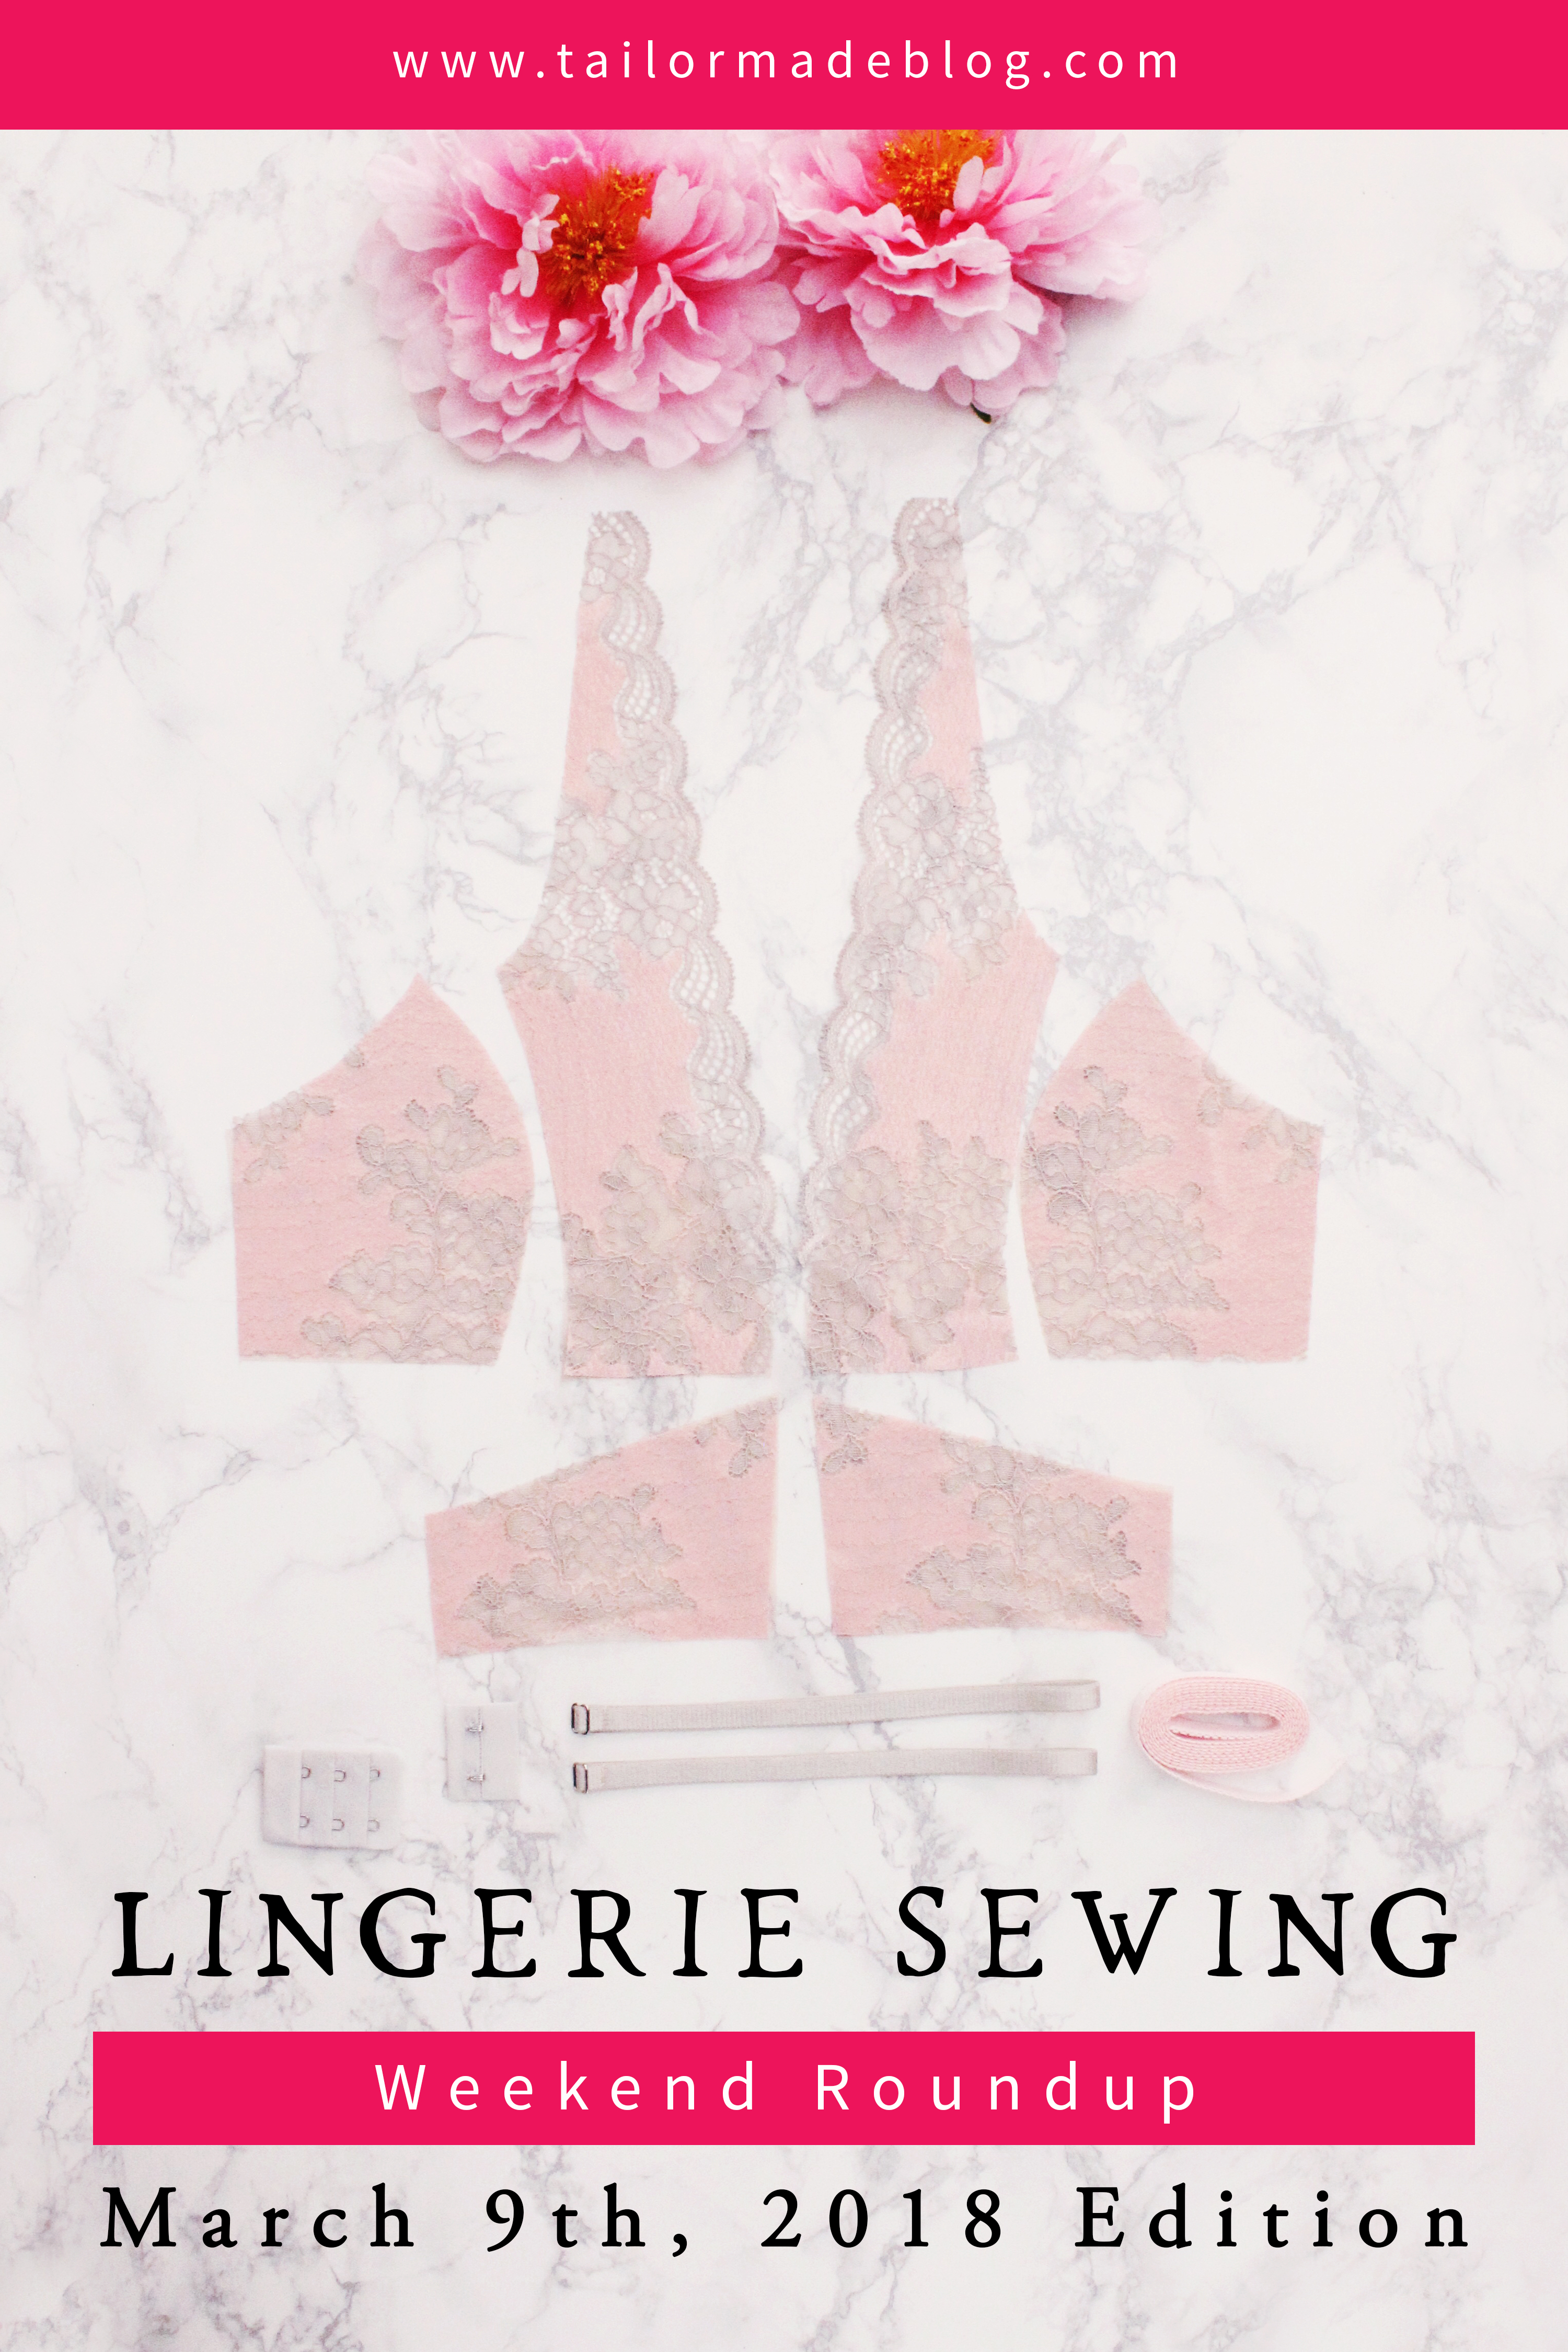 March 9th, 2018 Lingerie Sewing Weekend Round Up Latest news and makes and sewing projects from the lingerie sewing bra making community